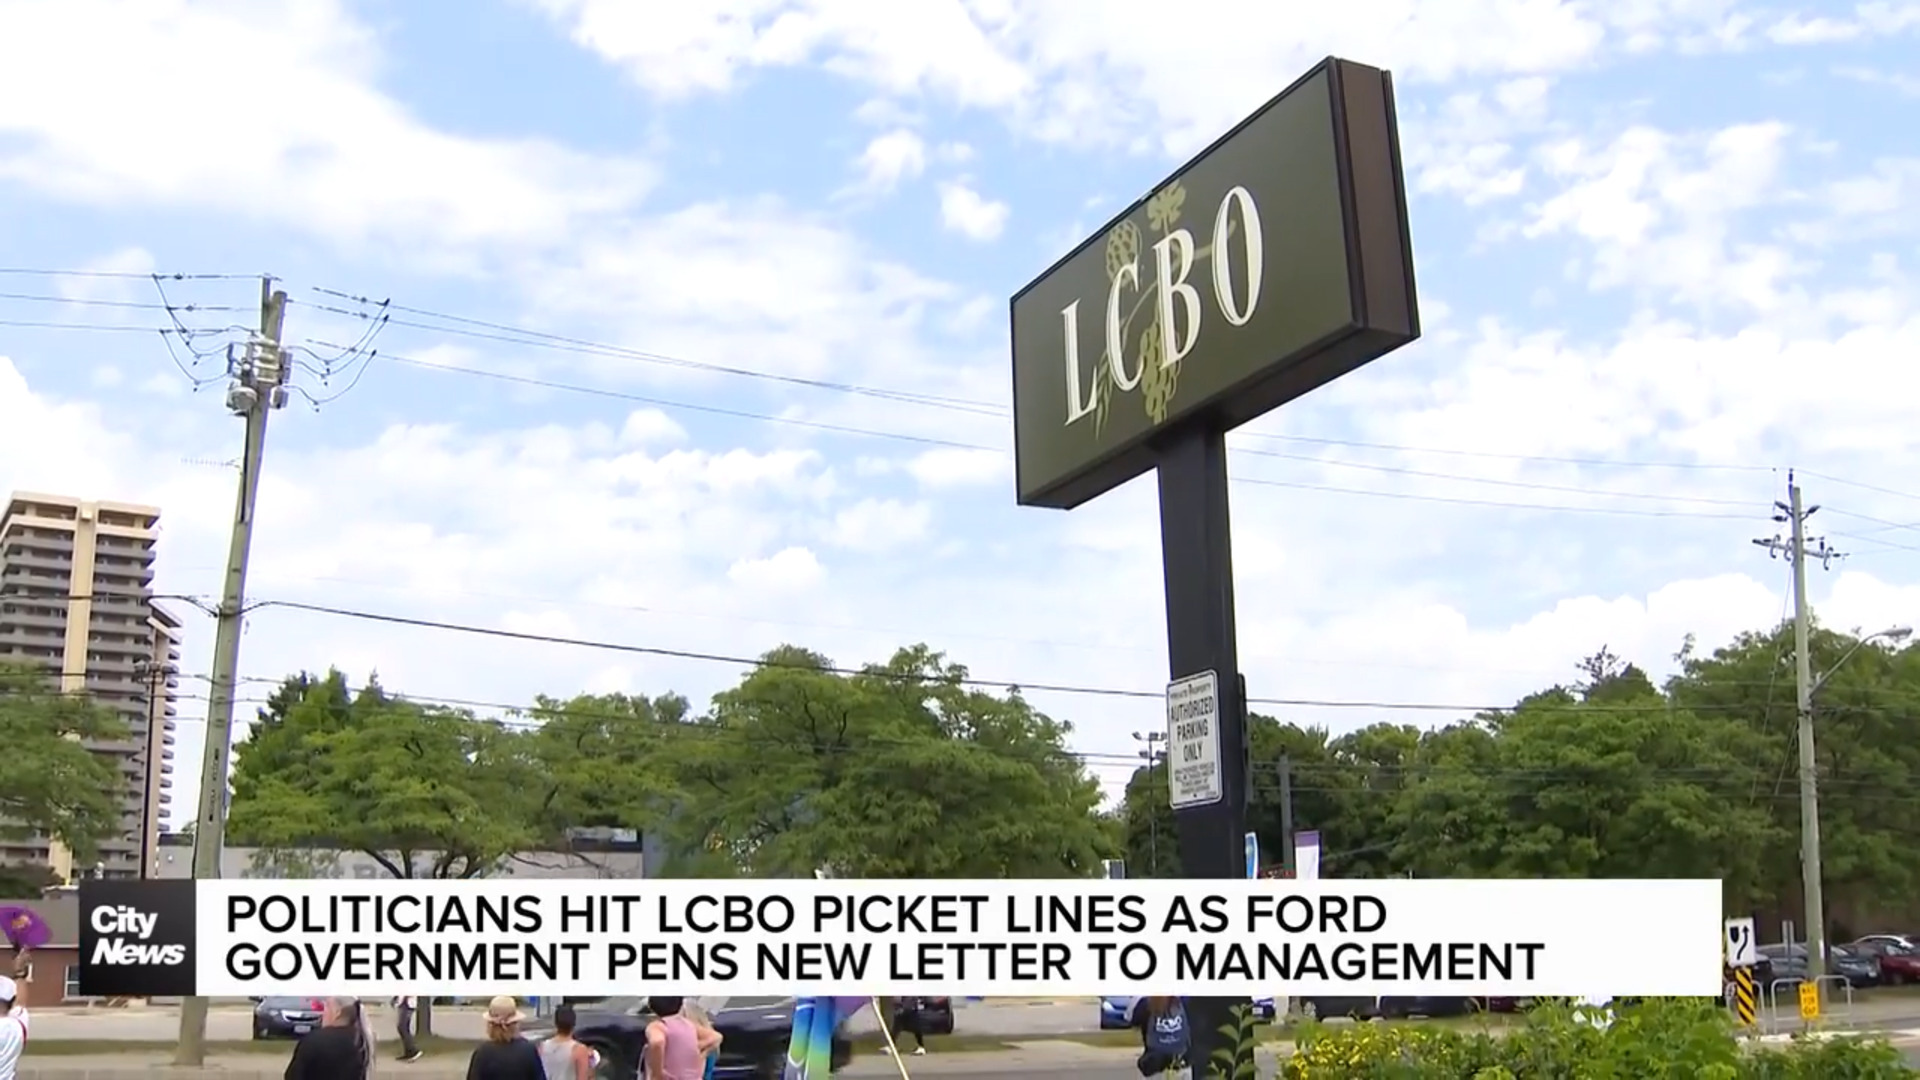 Politicians hit LCBO picket lines as Ford government pens new letter to management